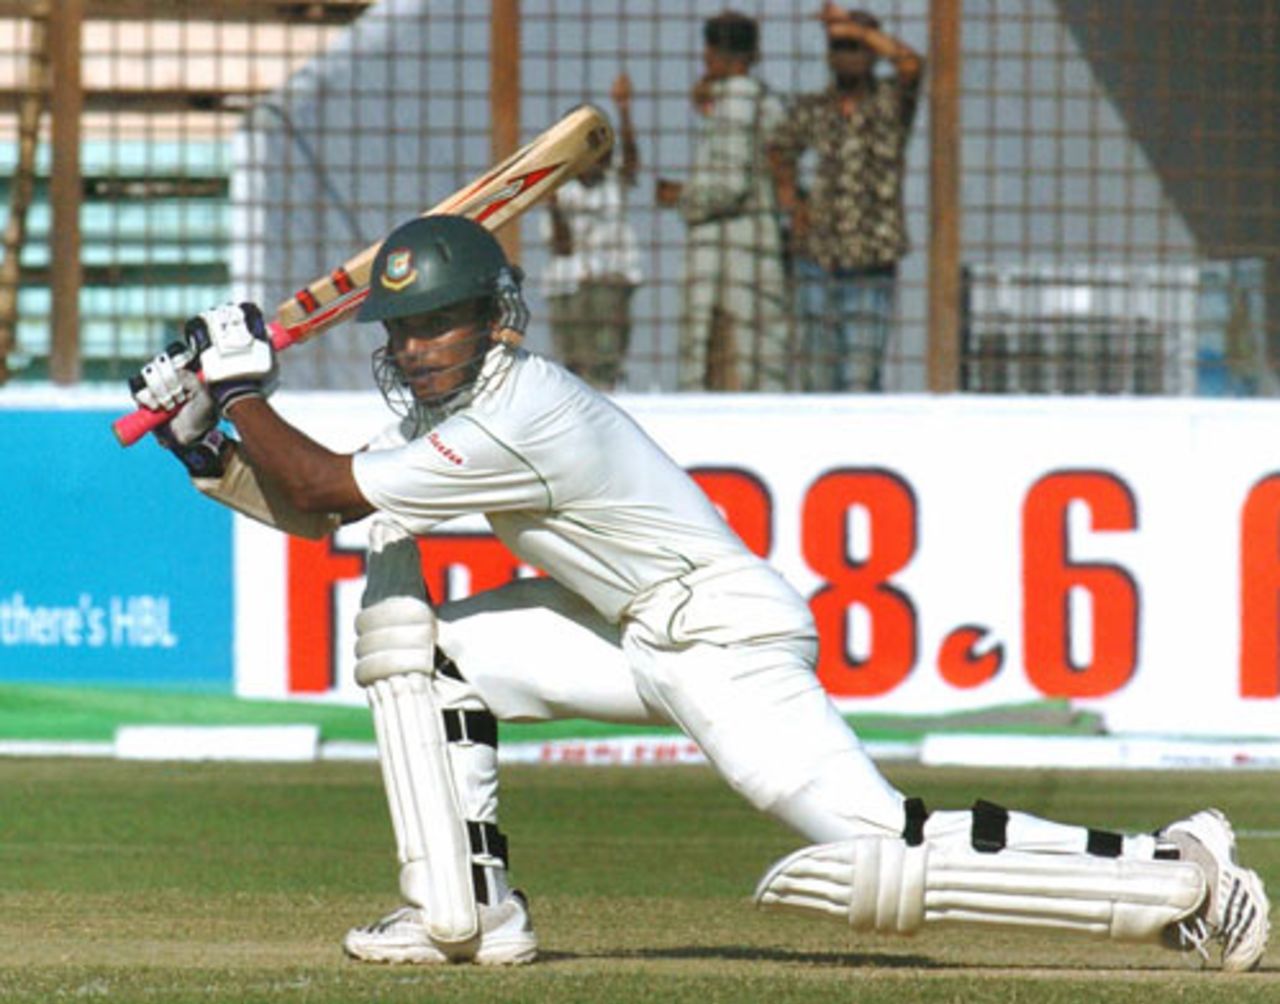 Mehrab Hossain jnr gets on the front foot and drills it through cover, Bangladesh v New Zealand,1st Test, Chittagong, 1st day, October 17, 2008